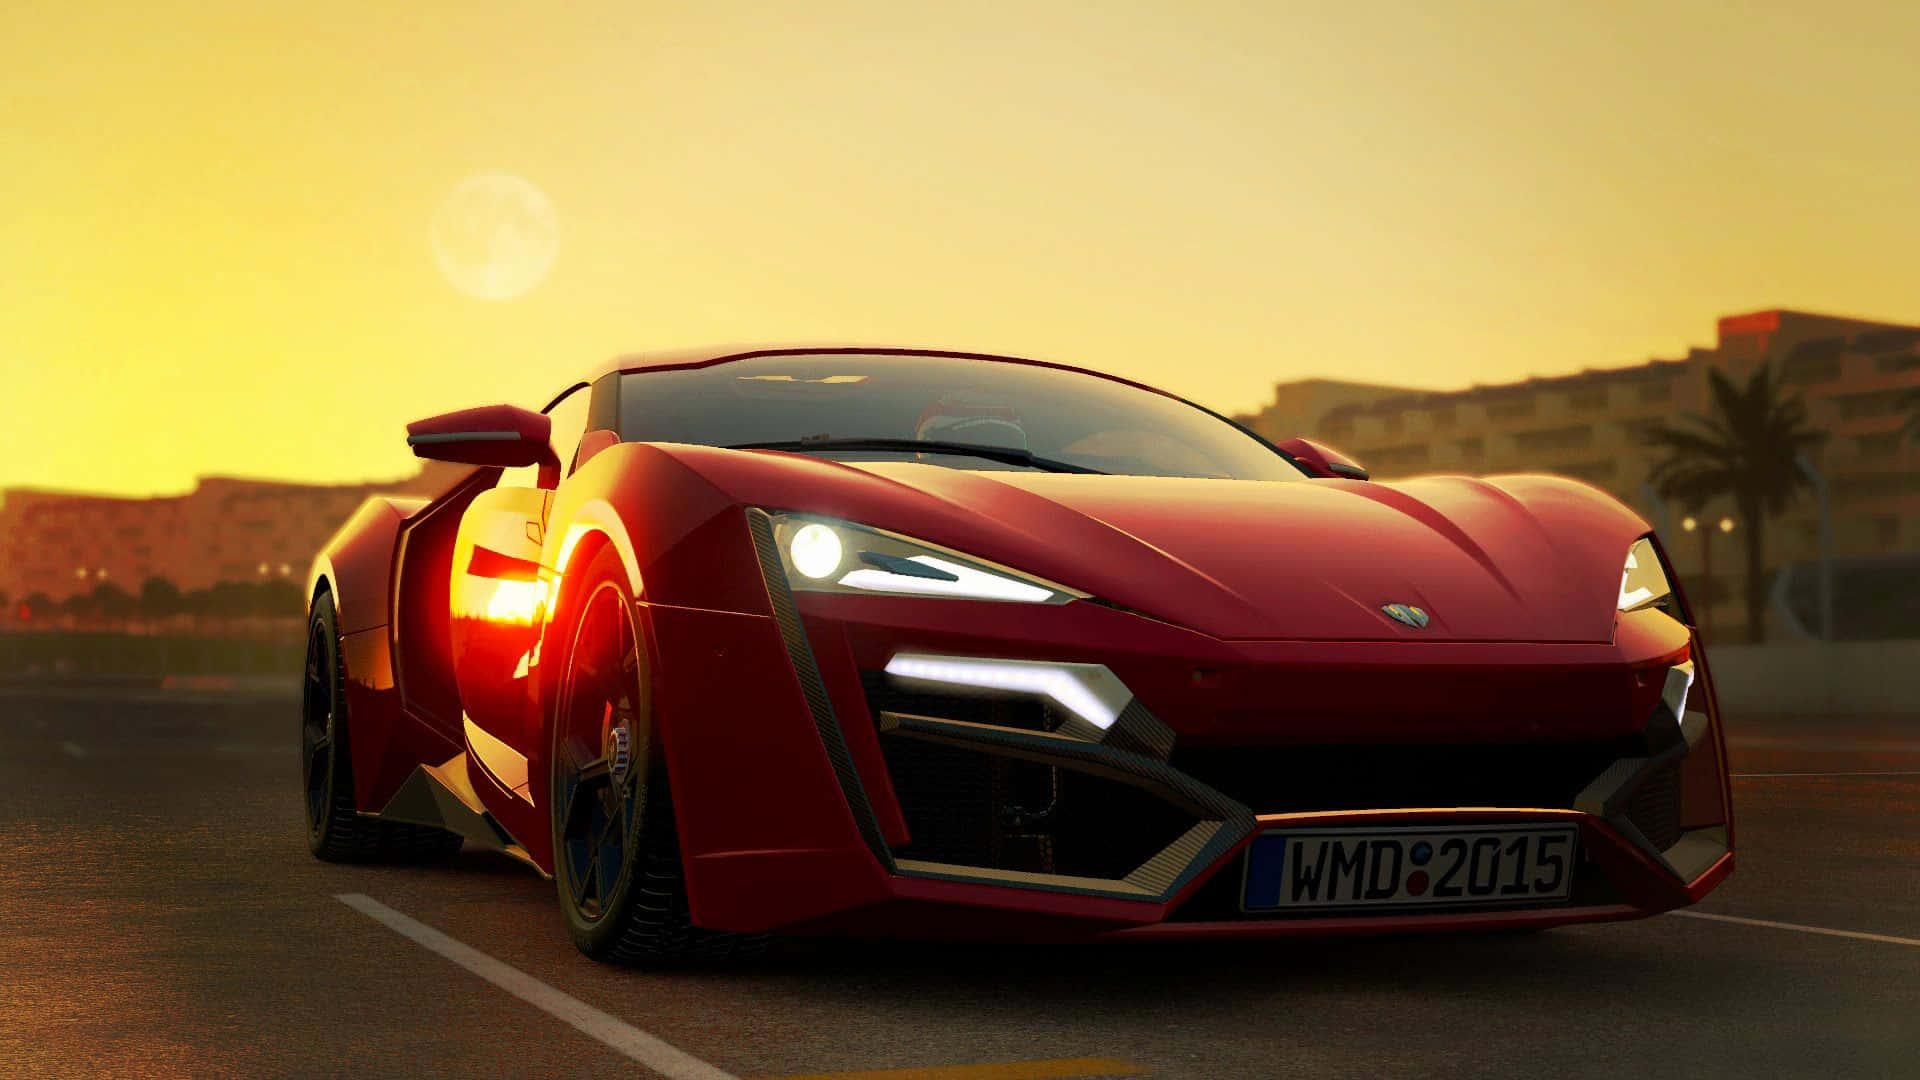 Cruise down the highway in a sleek, fast car. Wallpaper